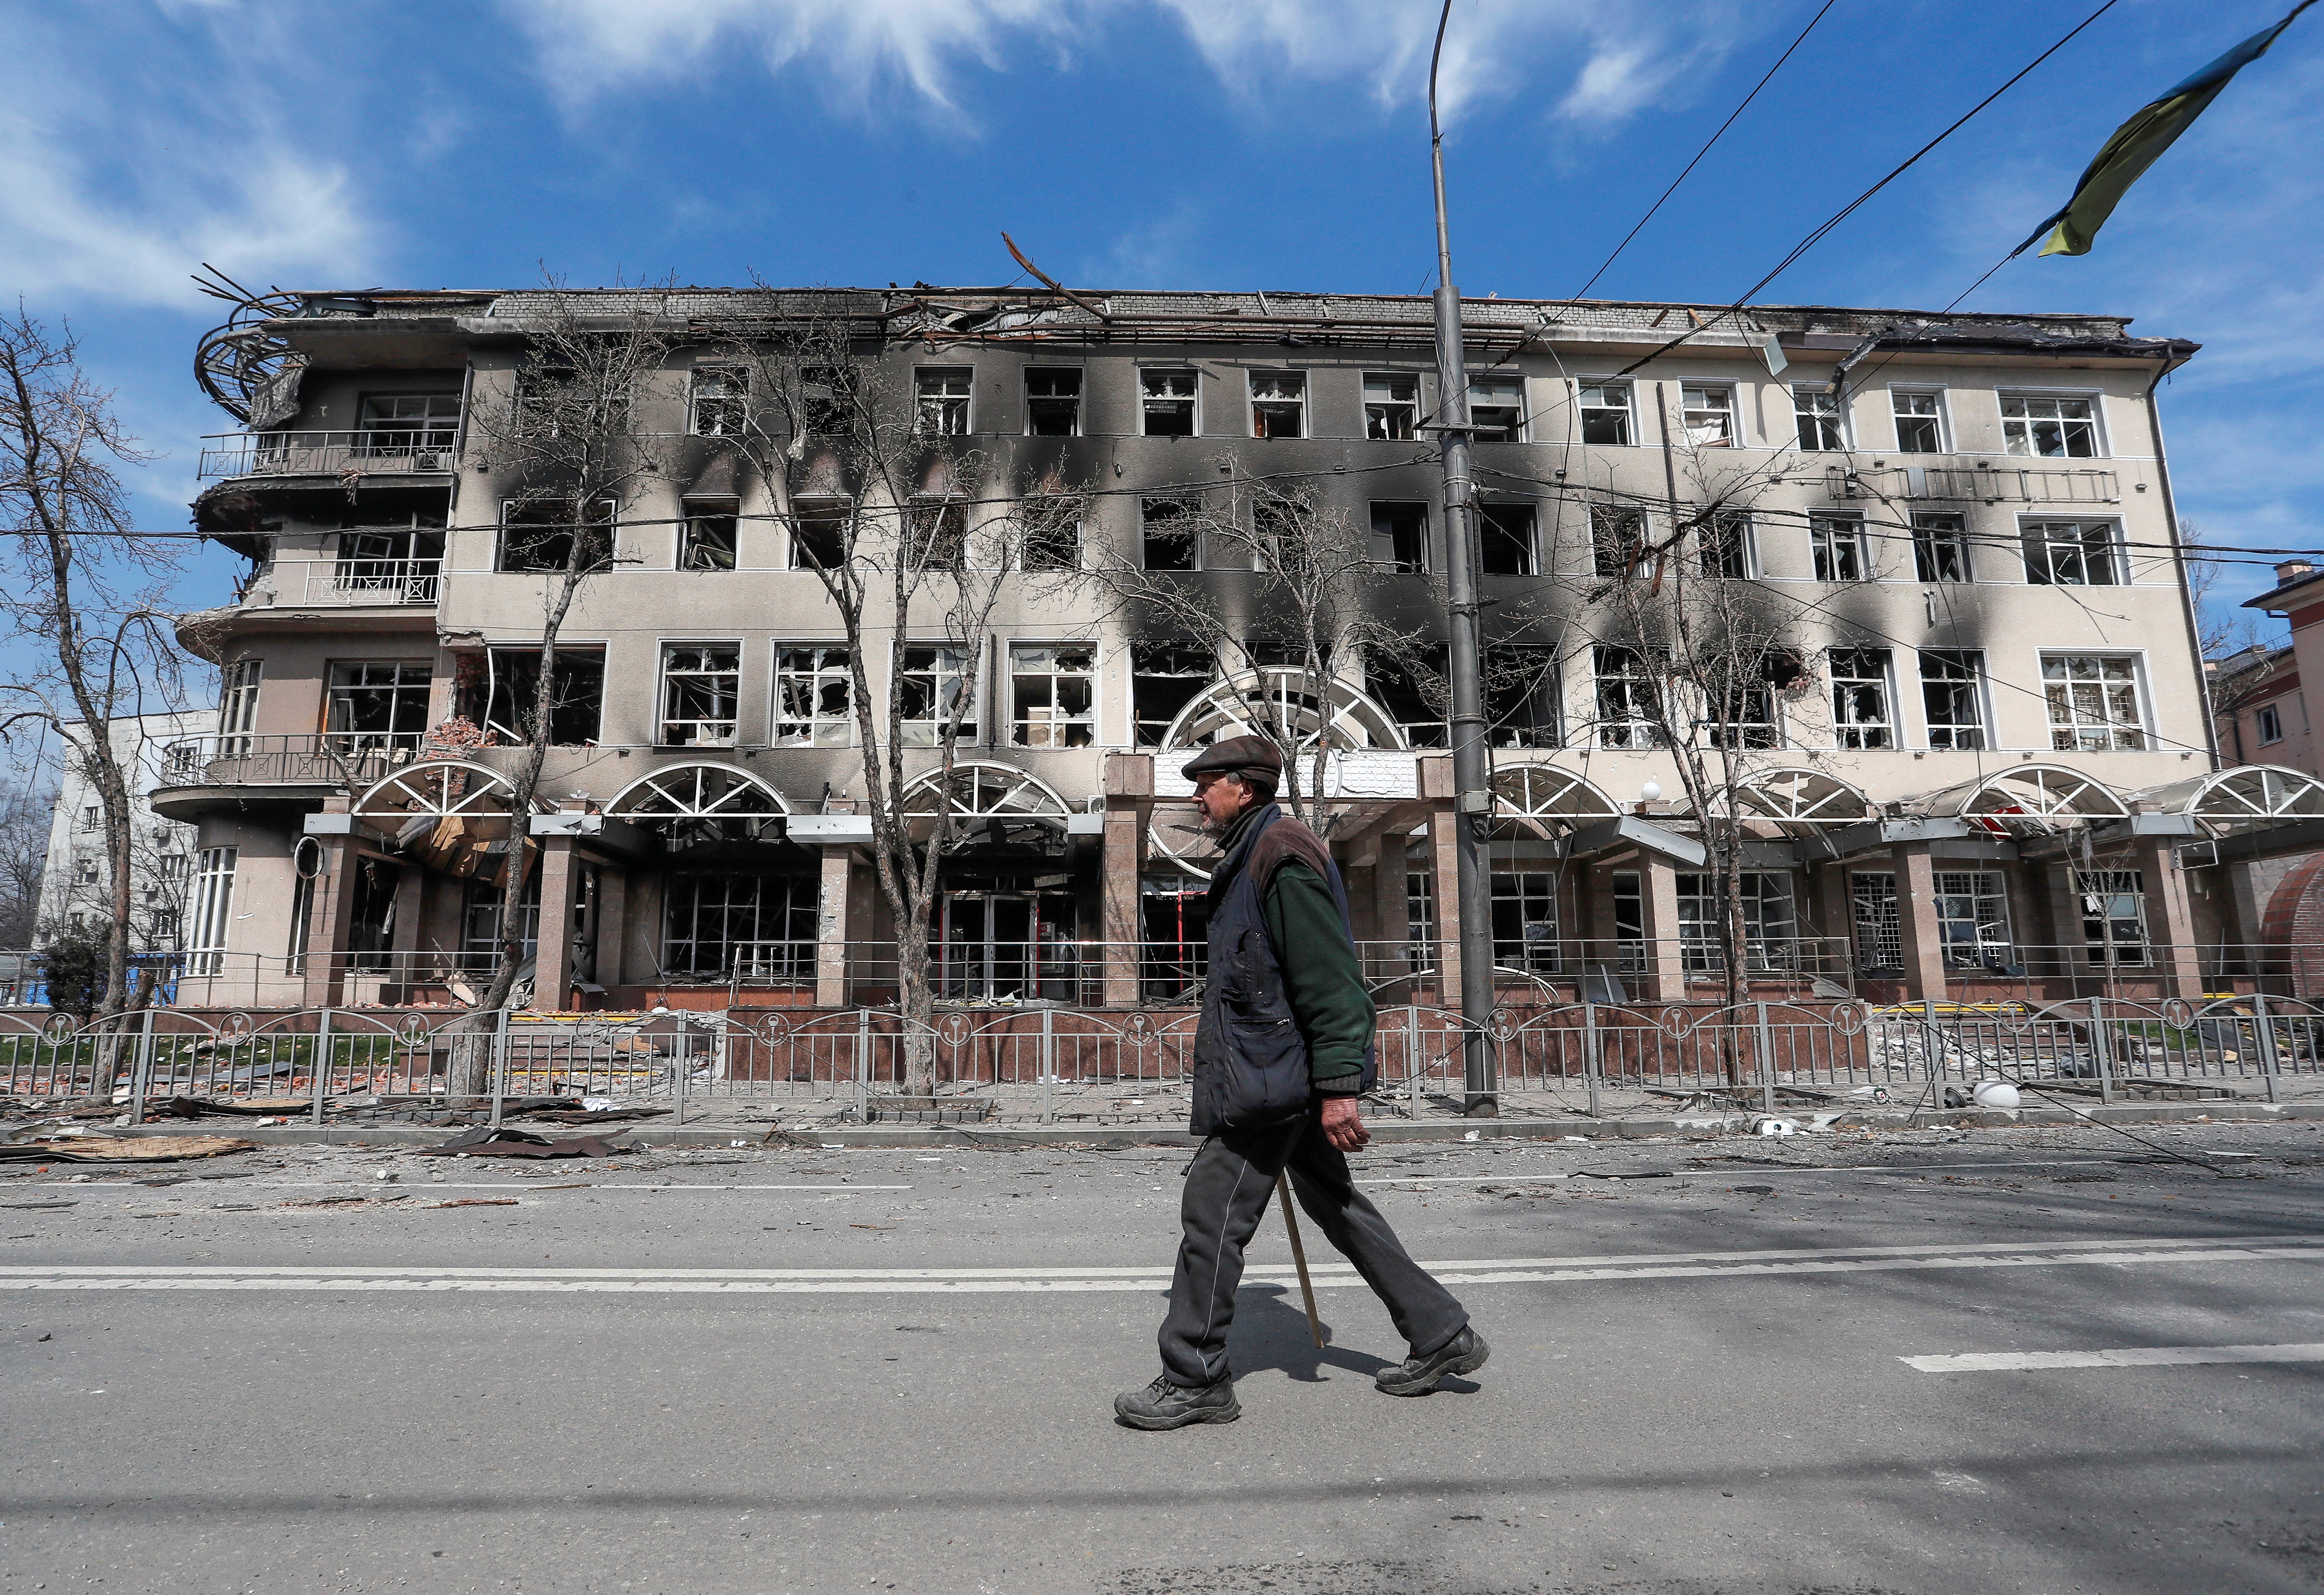 A resident walks near a building destroyed in the course of the Ukraine-Russia conflict, in Mariupol